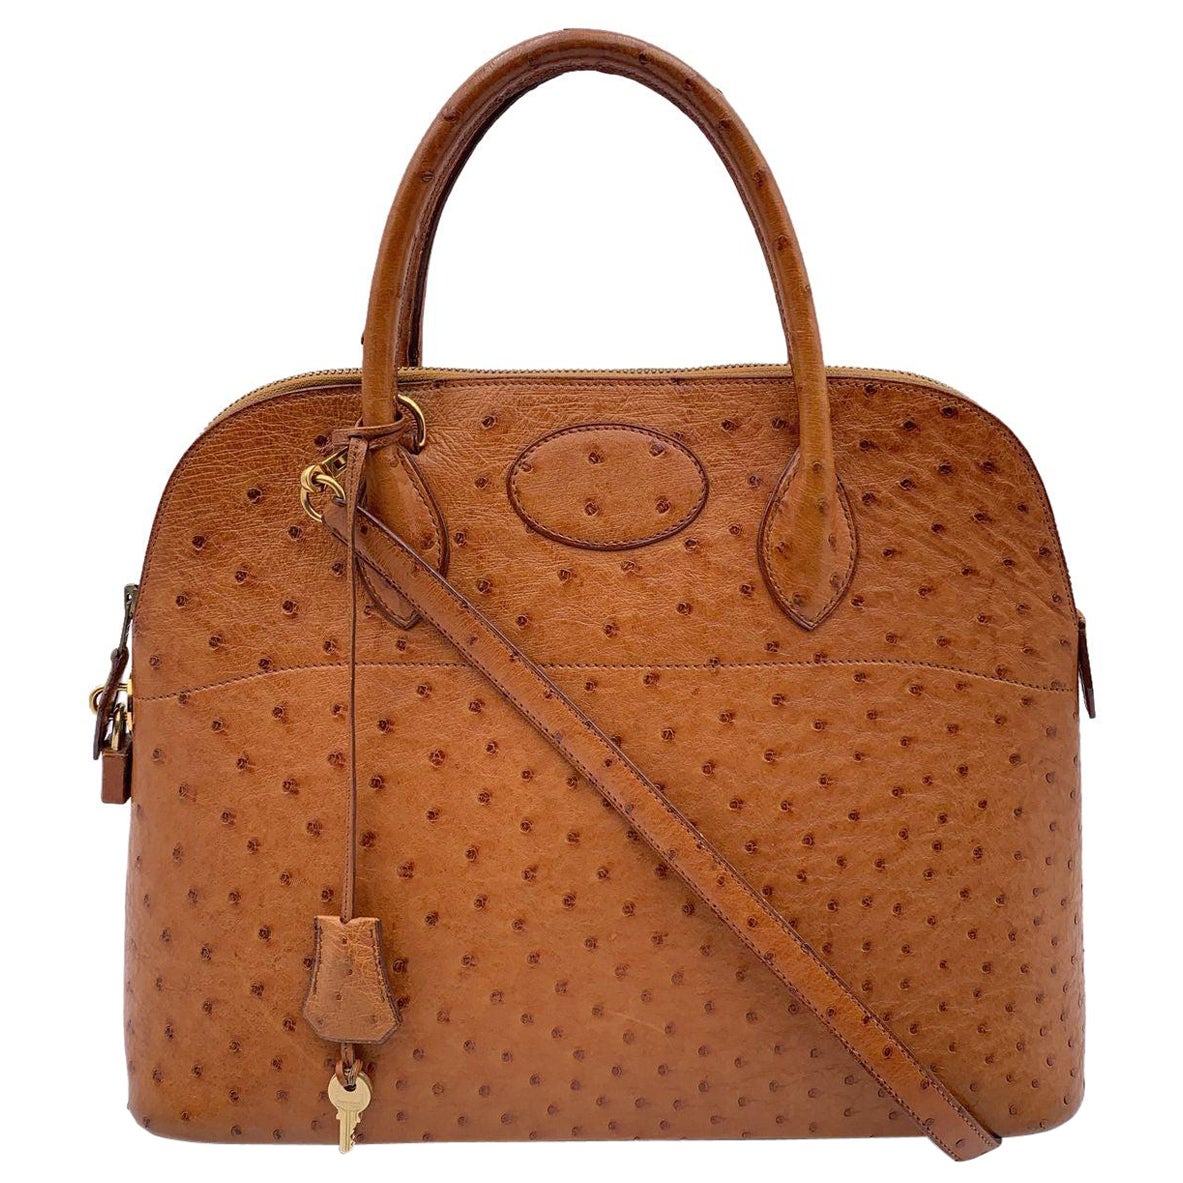 Hermes Vintage 1992 Tan Ostrich Leather Bolide 35 Bag with Strap For Sale